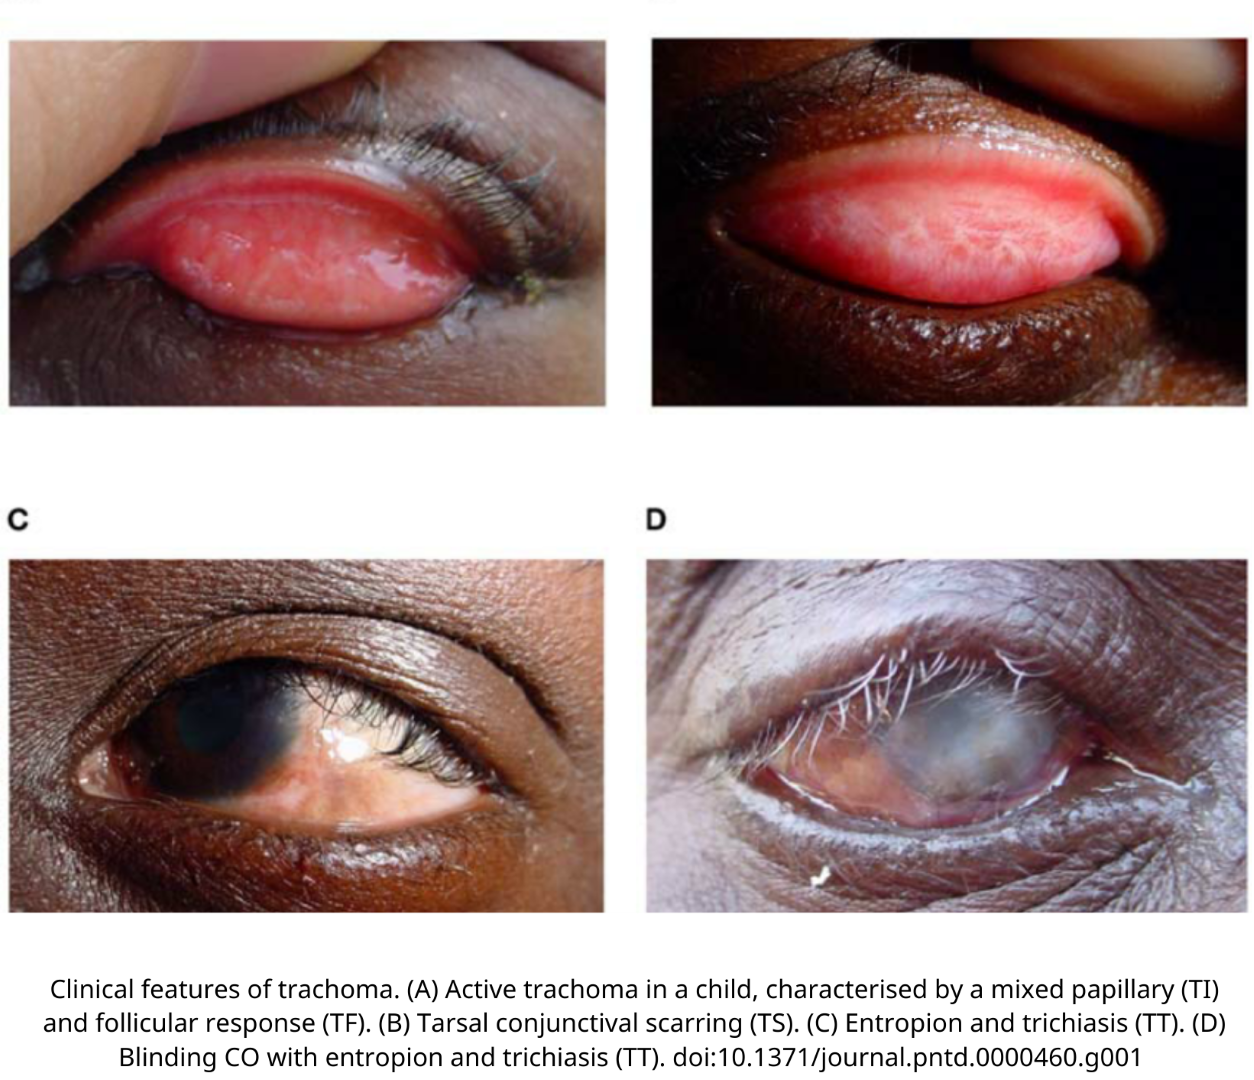 Four images showing different stages of trachoma. Image A shows inflamed inner eyelid, image B shows advanced inflammation with follicles, image C shows scarring of the inner eyelid, and image D shows an eye with trichiasis and corneal opacity.